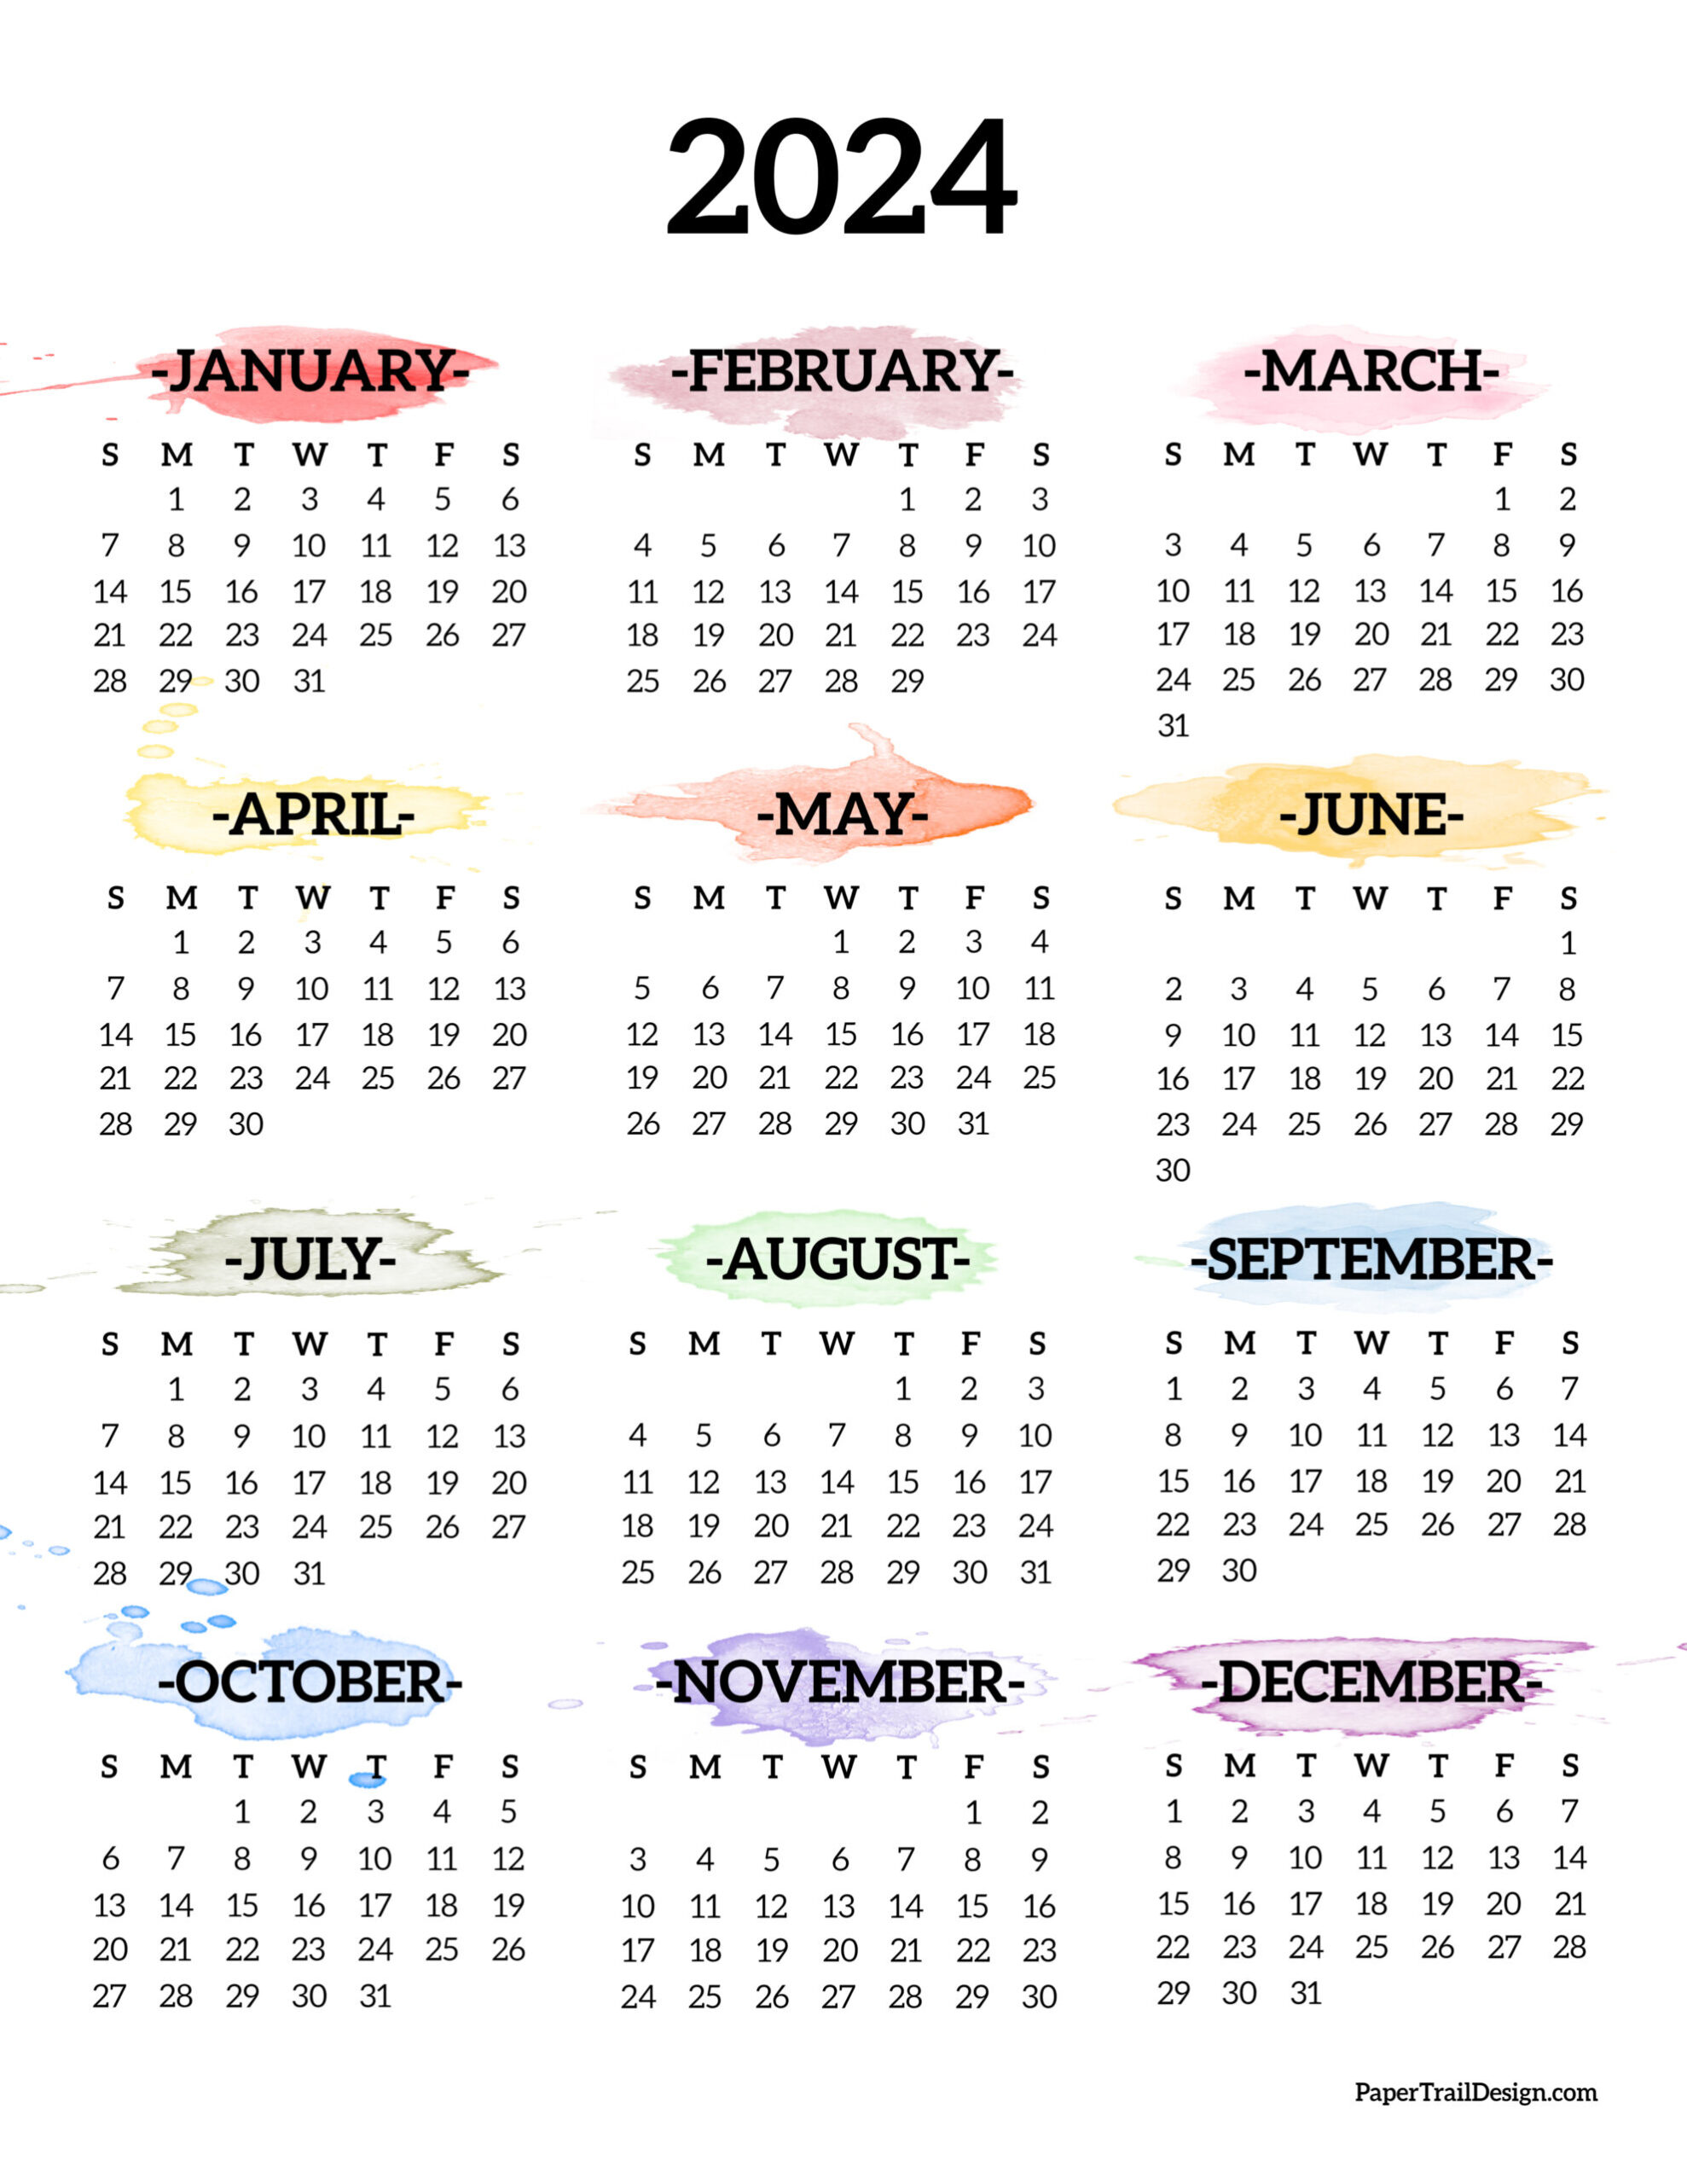 Calendar 2024 Printable One Page - Paper Trail Design for Year At A Glance Calendar 2024 Free Printable